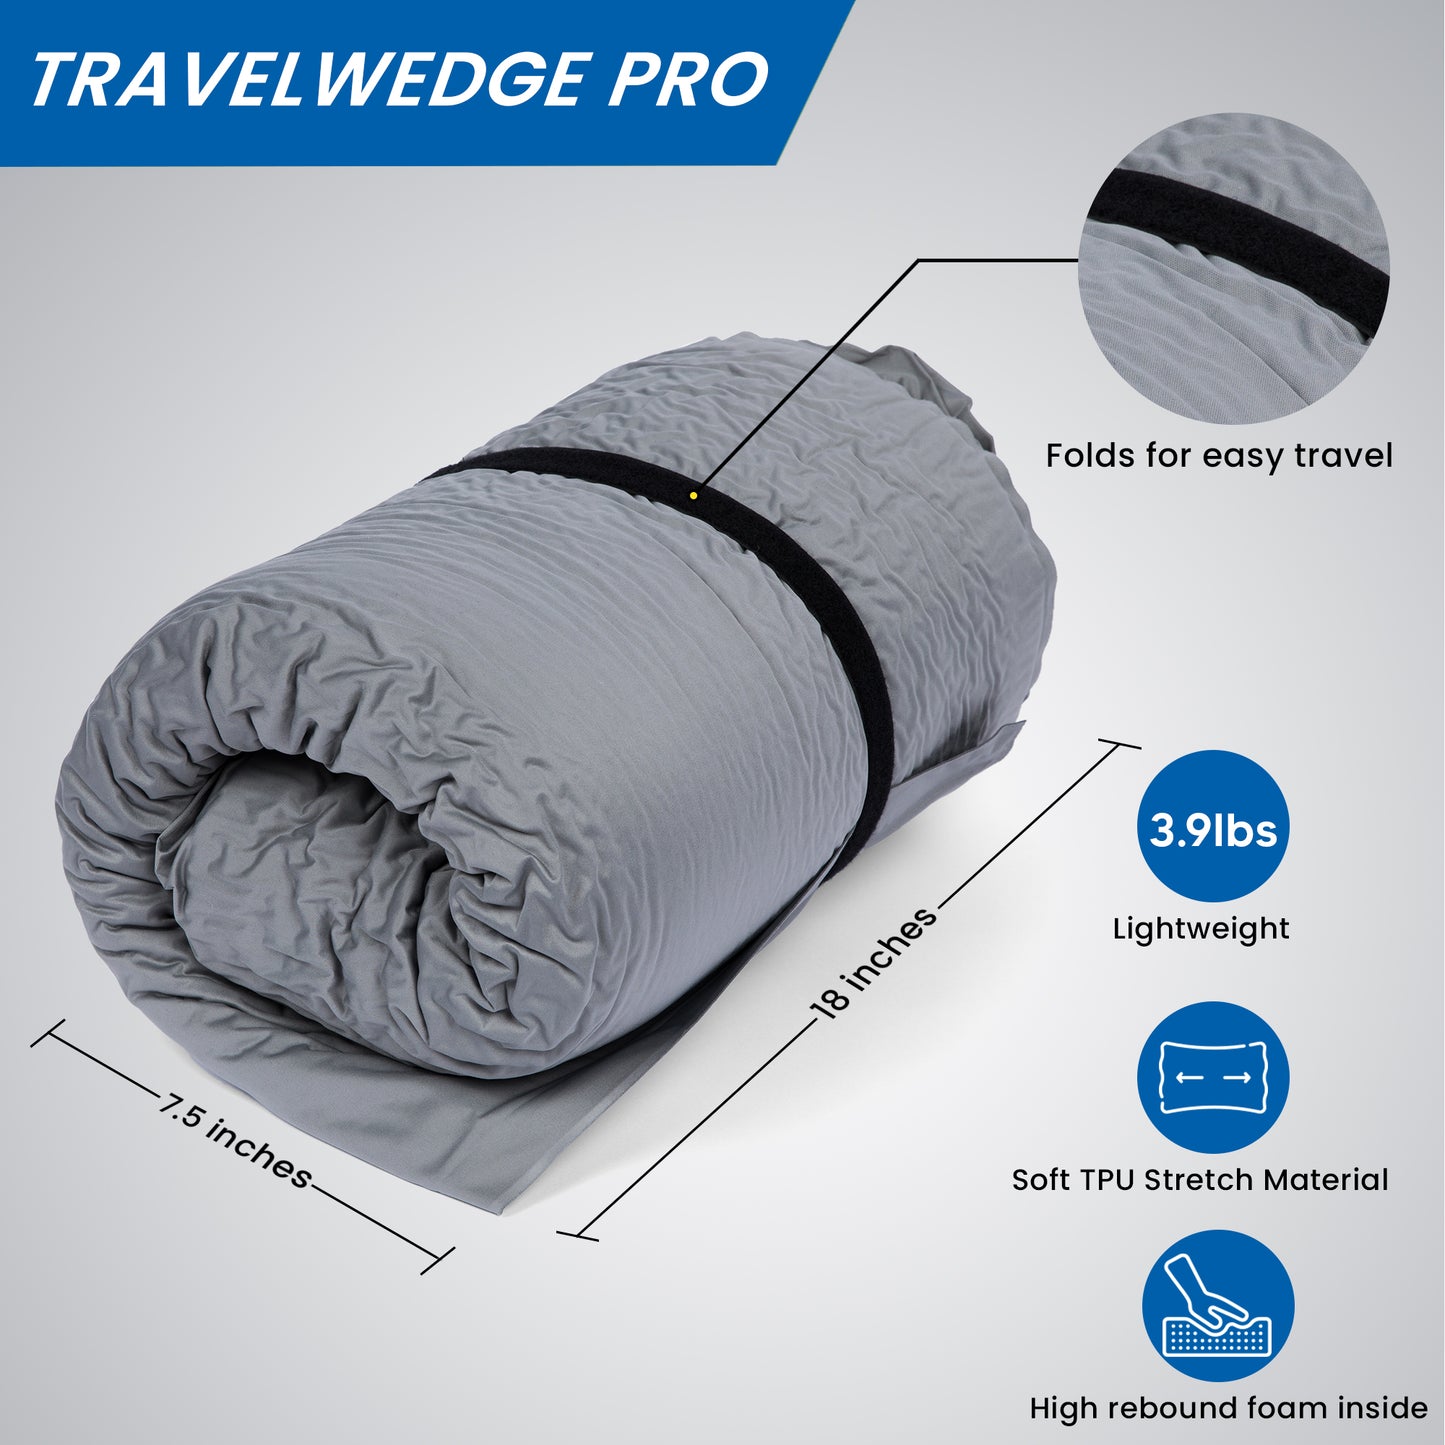 Self Inflating Bed Wedge Pillow - Travelwedge PRO